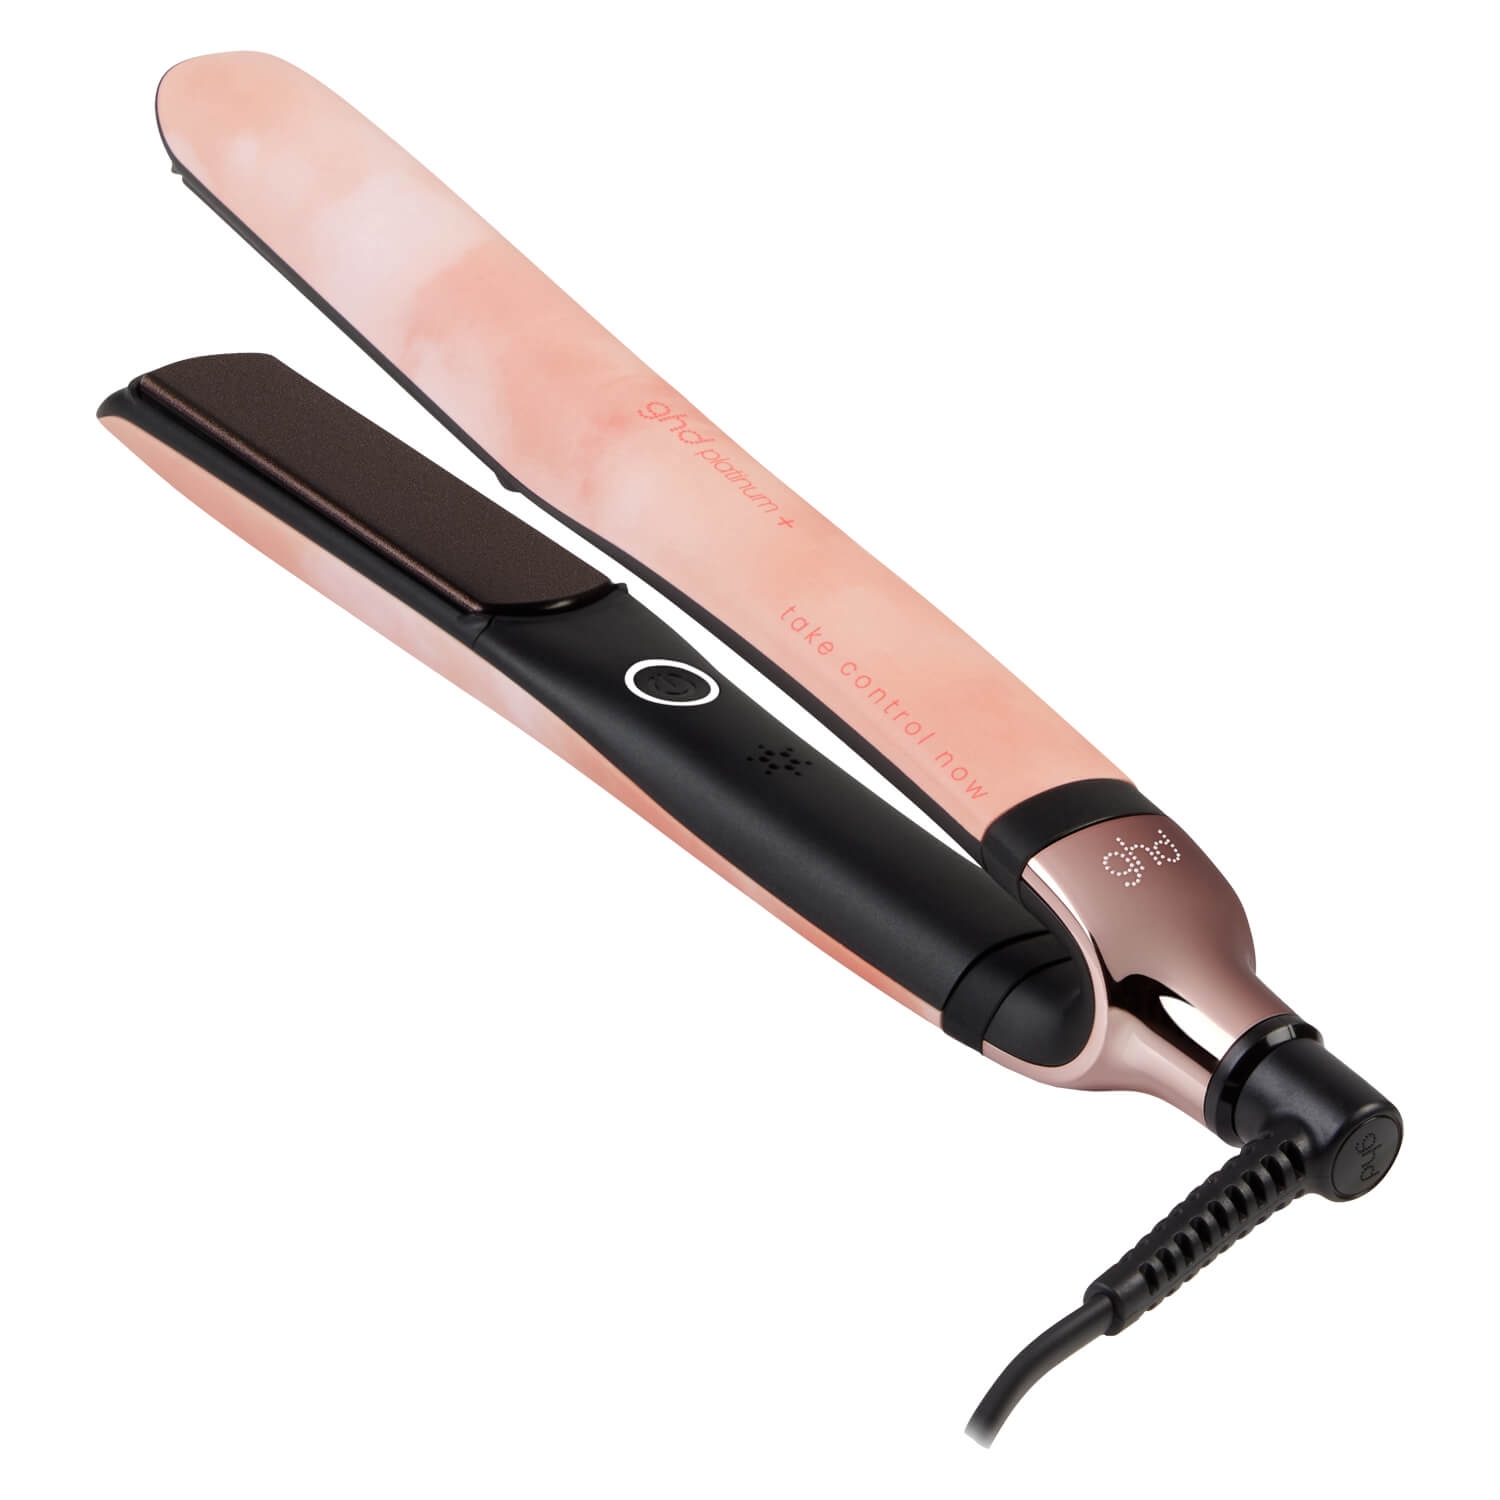 Product image from ghd Tools - Platinum+ Styler Pink Peach Charity Edition